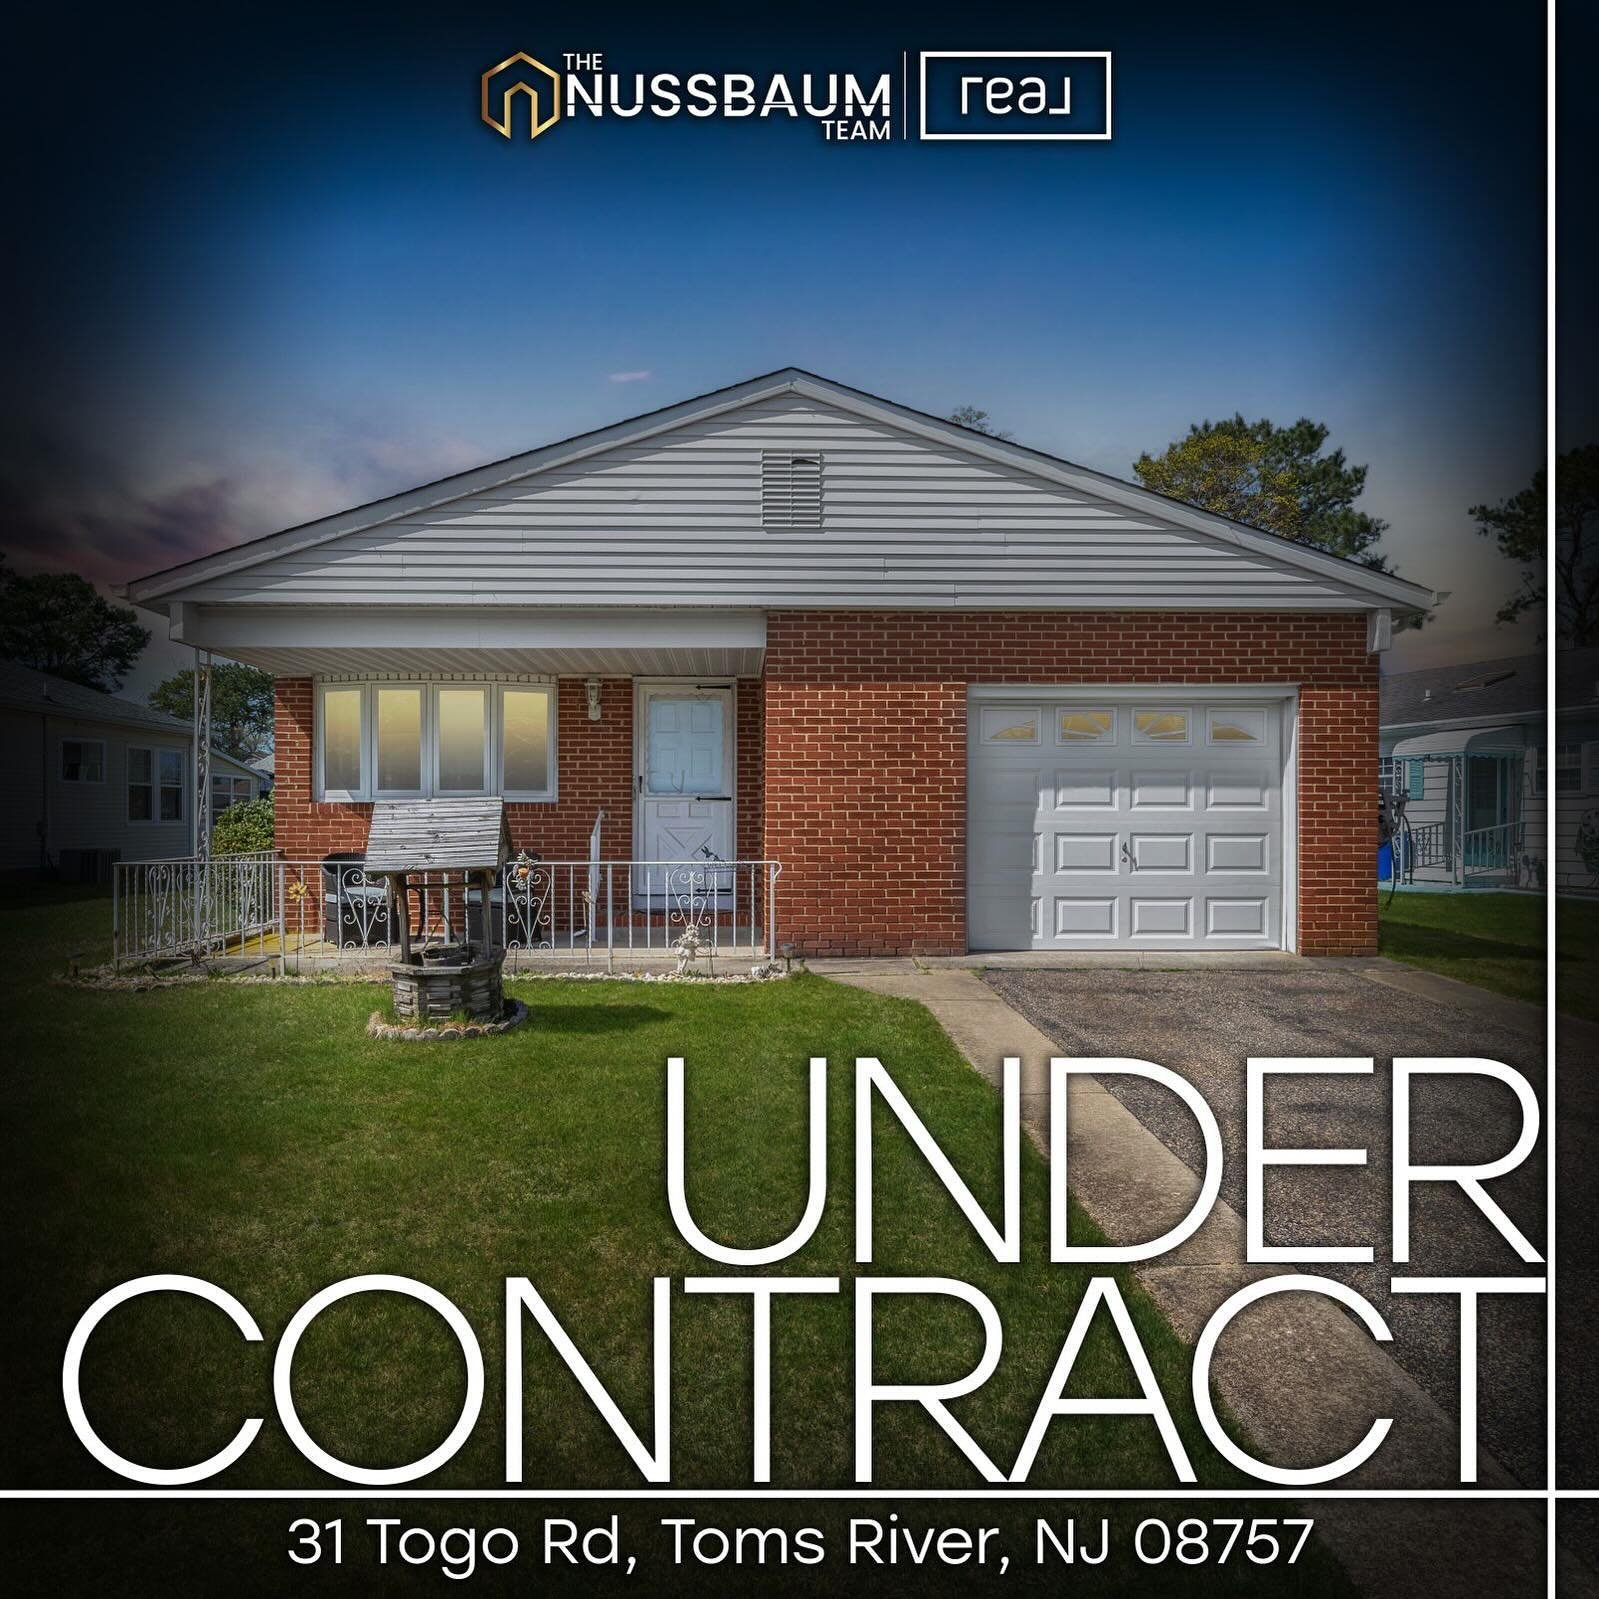 💥UNDER CONTRACT!💥
📍31 Togo Rd, Toms River, NJ 08757
2 Bed | 2 Bath | 1,232Ft.&sup2;

This Holiday City South home is officially Under Contract! We are so excited for all thats to come &amp; look forward to seeing everyone at closing! 🥂

Listed &a